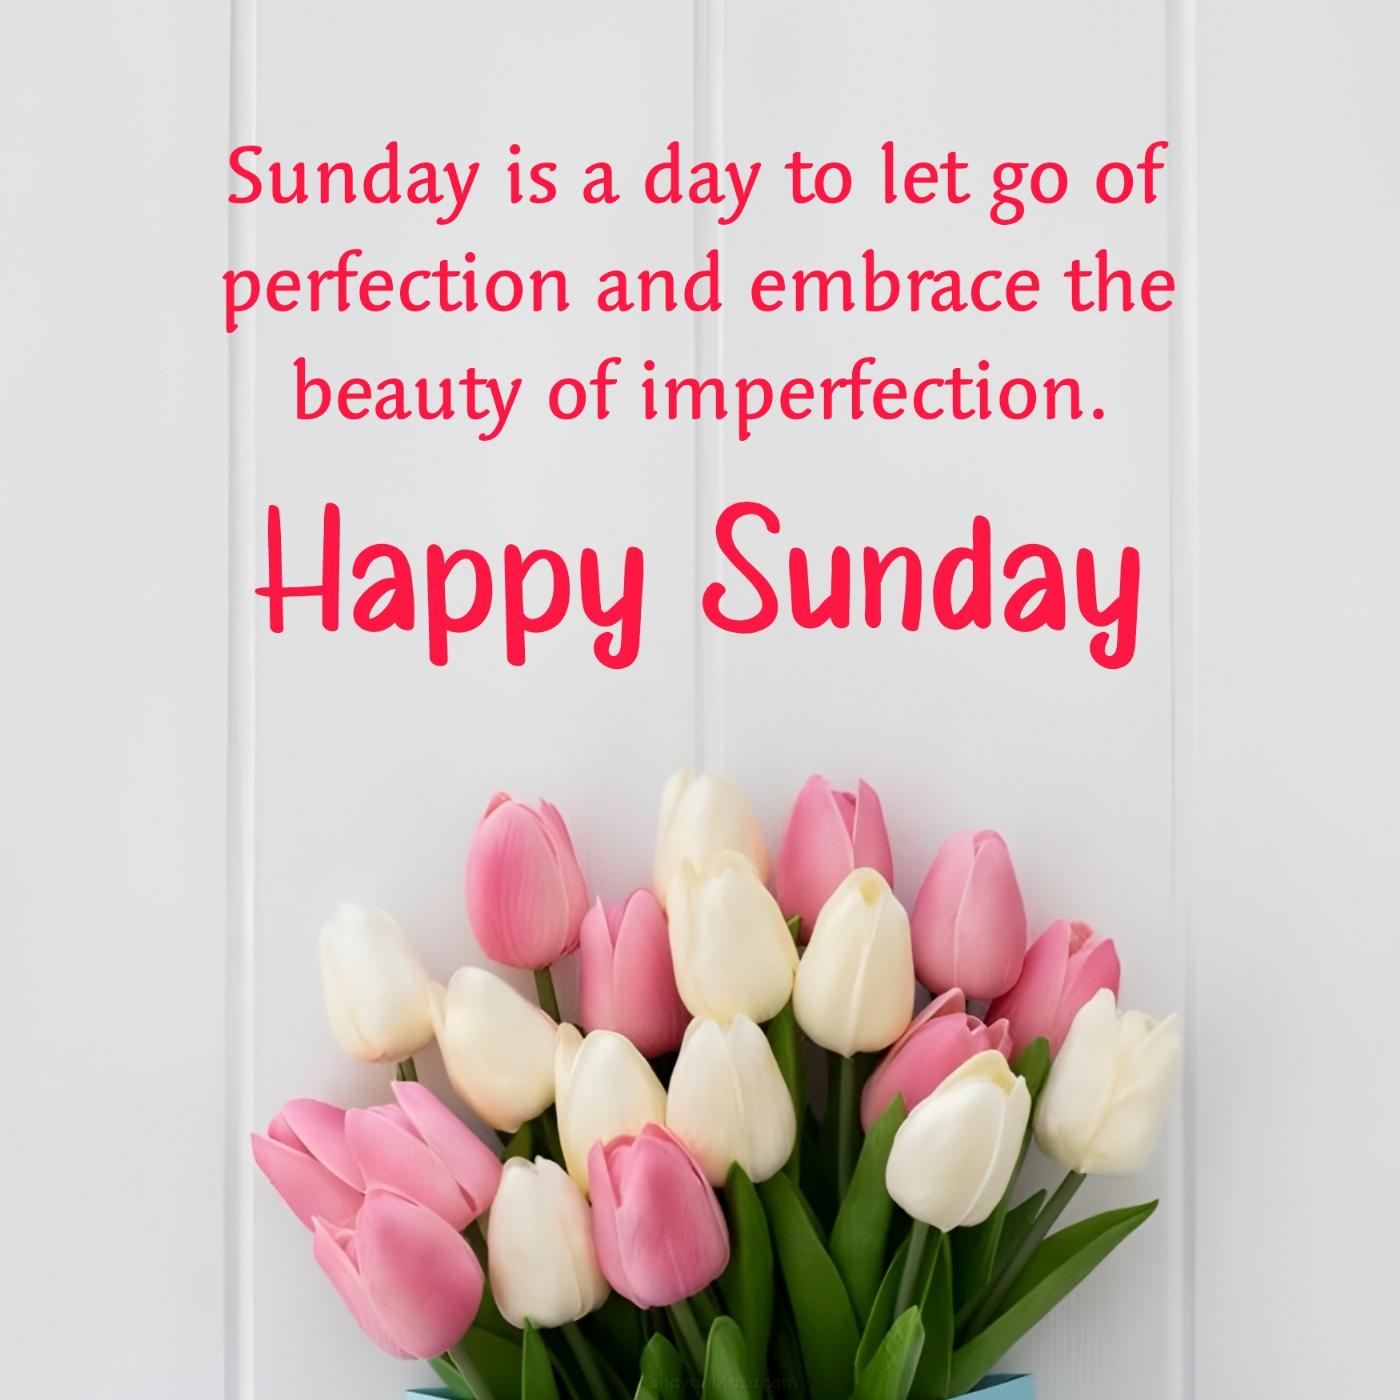 Sunday is a day to let go of perfection and embrace the beauty